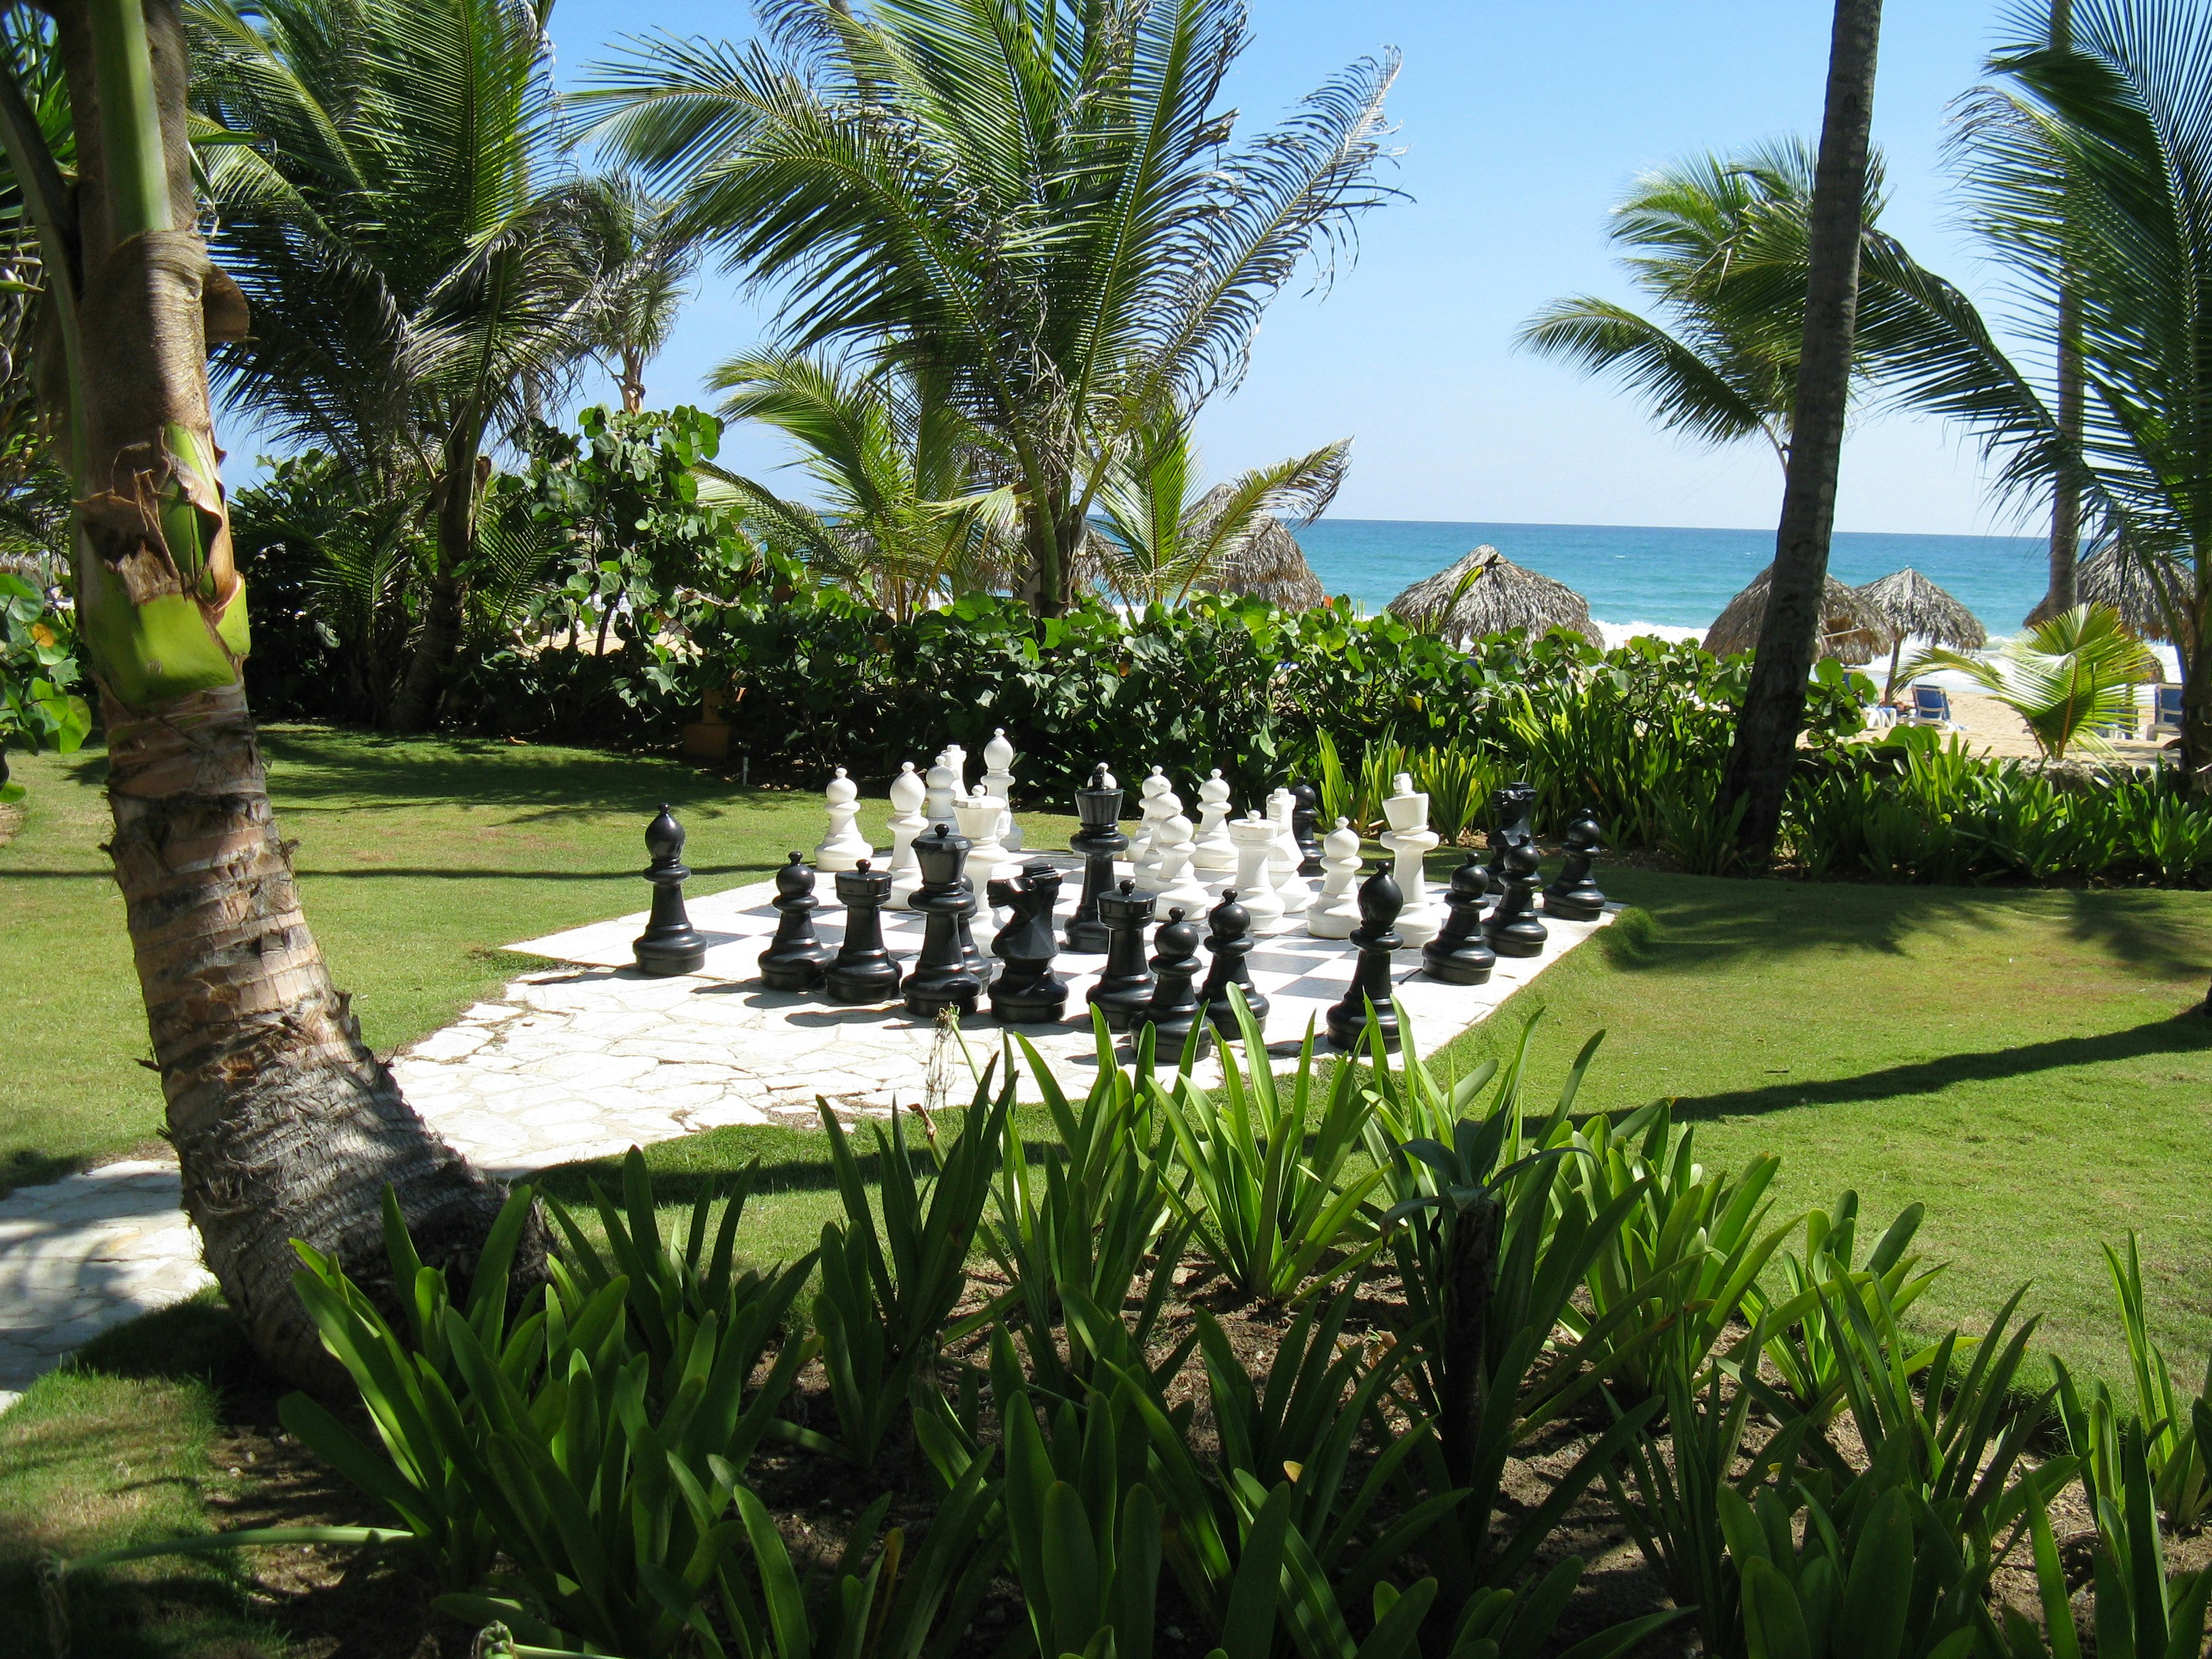 giant-sized chess set by the beach